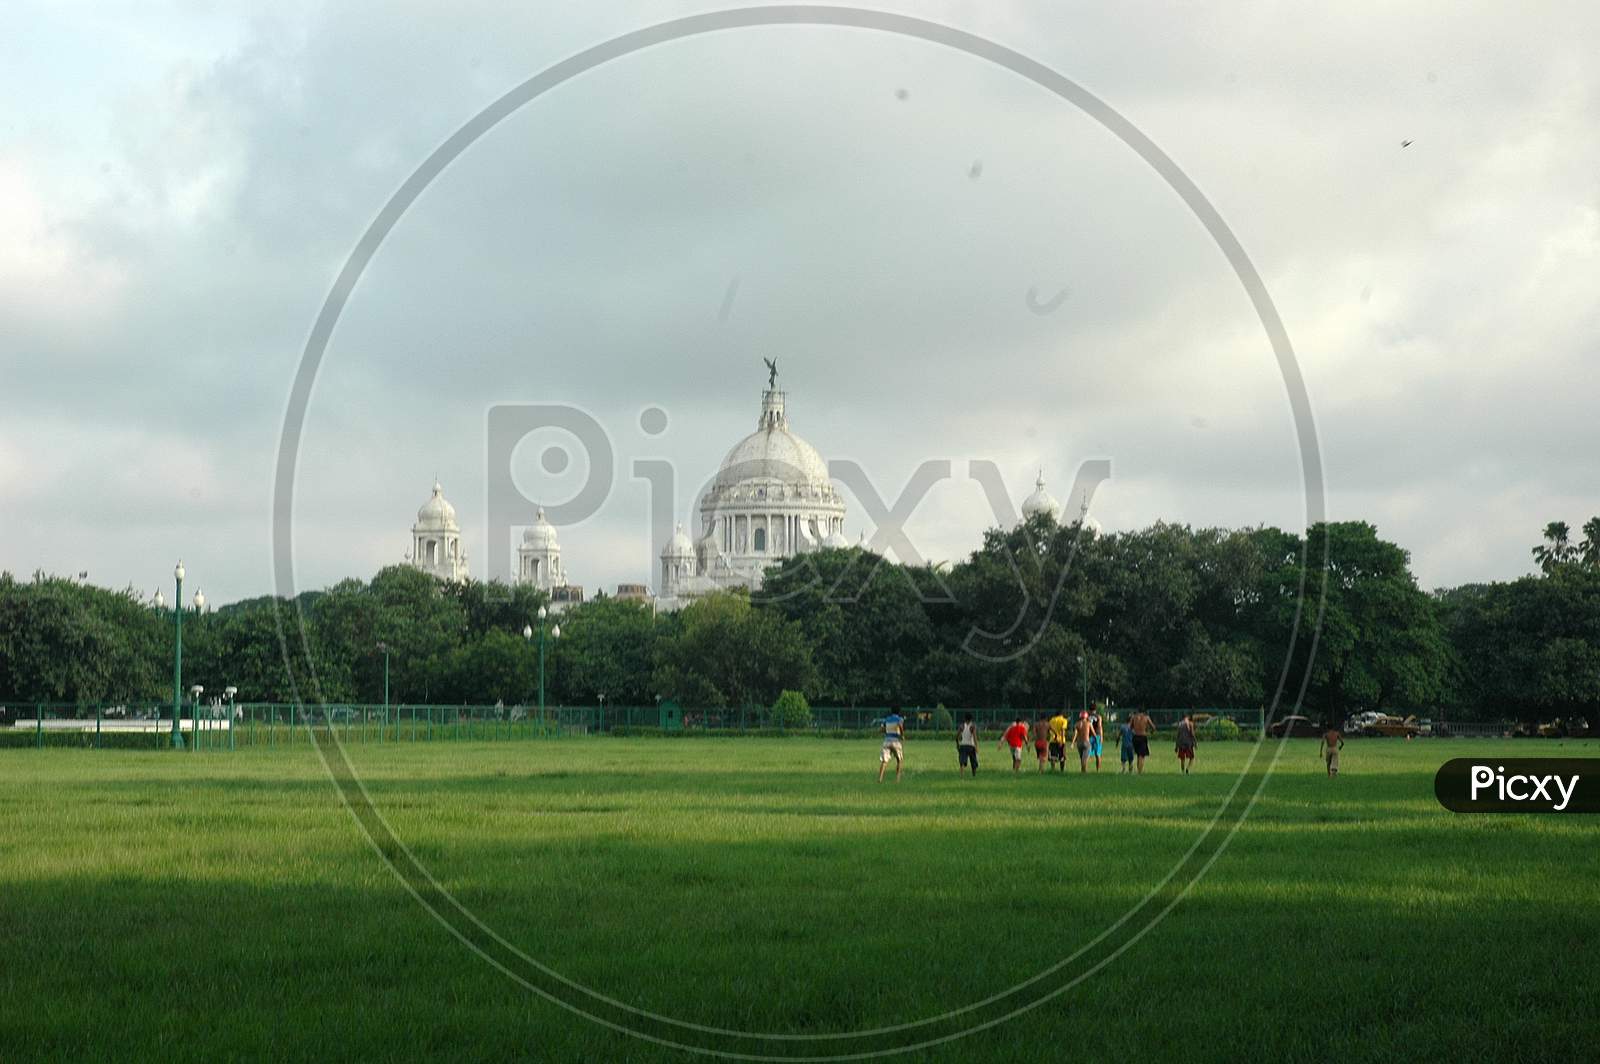 Horse Grazing On Lawn Garden With Victoria Palace in Background At Maidan , Kolkata